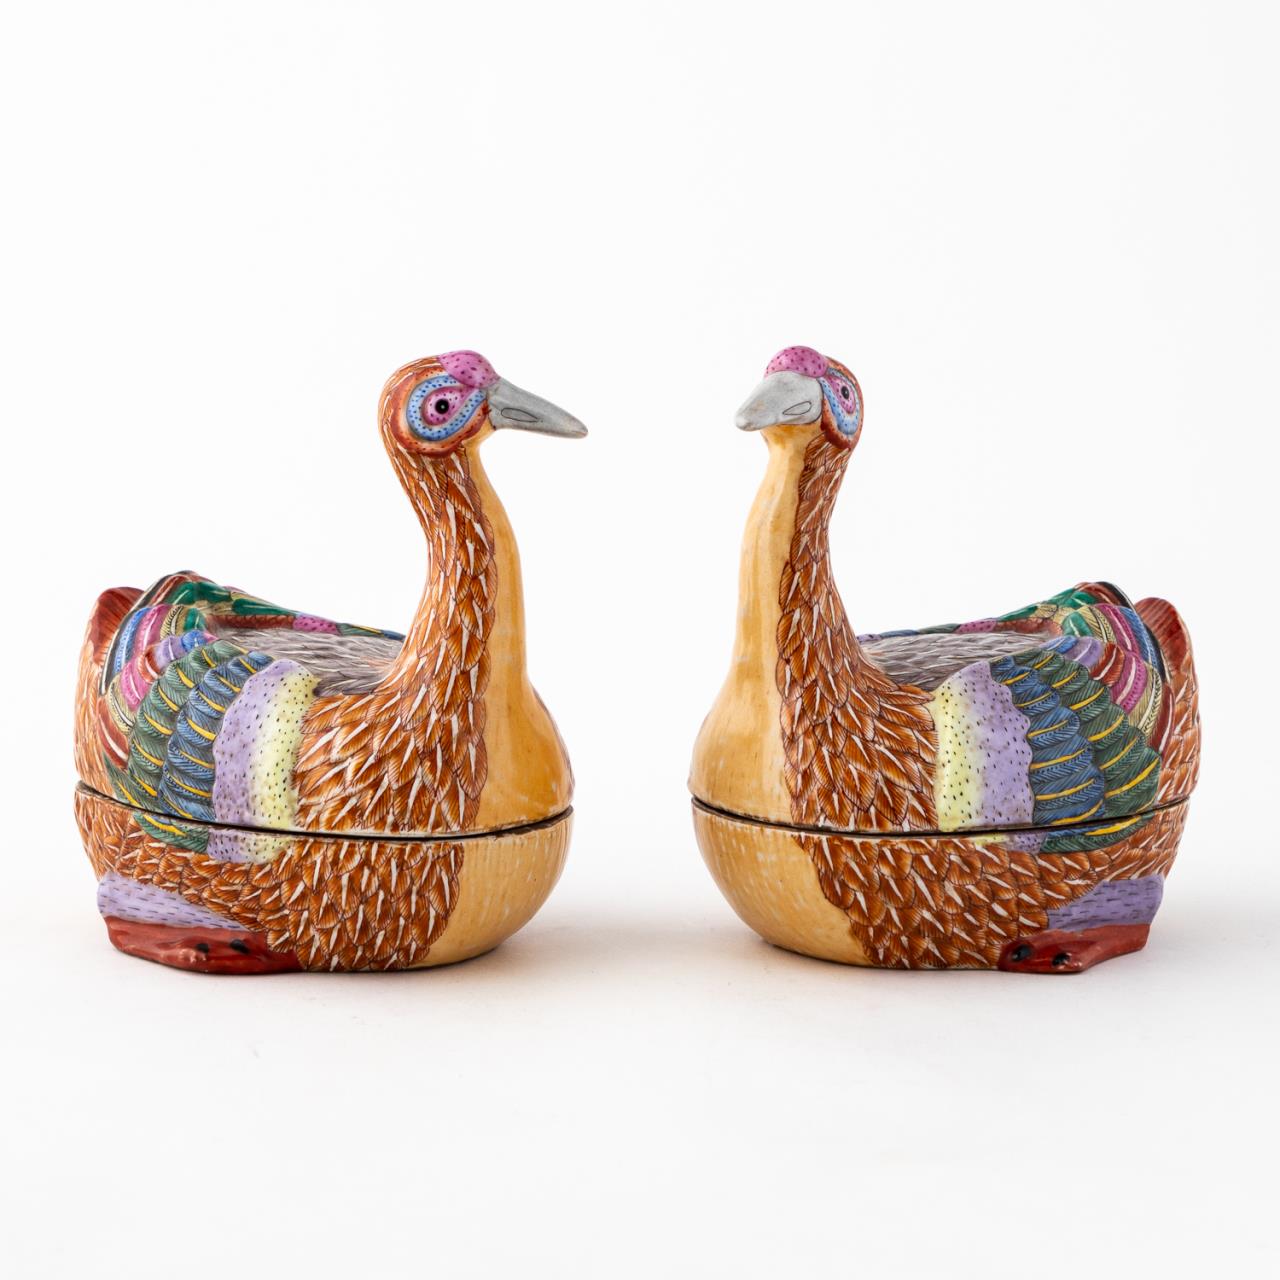 PAIR CHINESE GOOSE FORM PORCELAIN 35c382